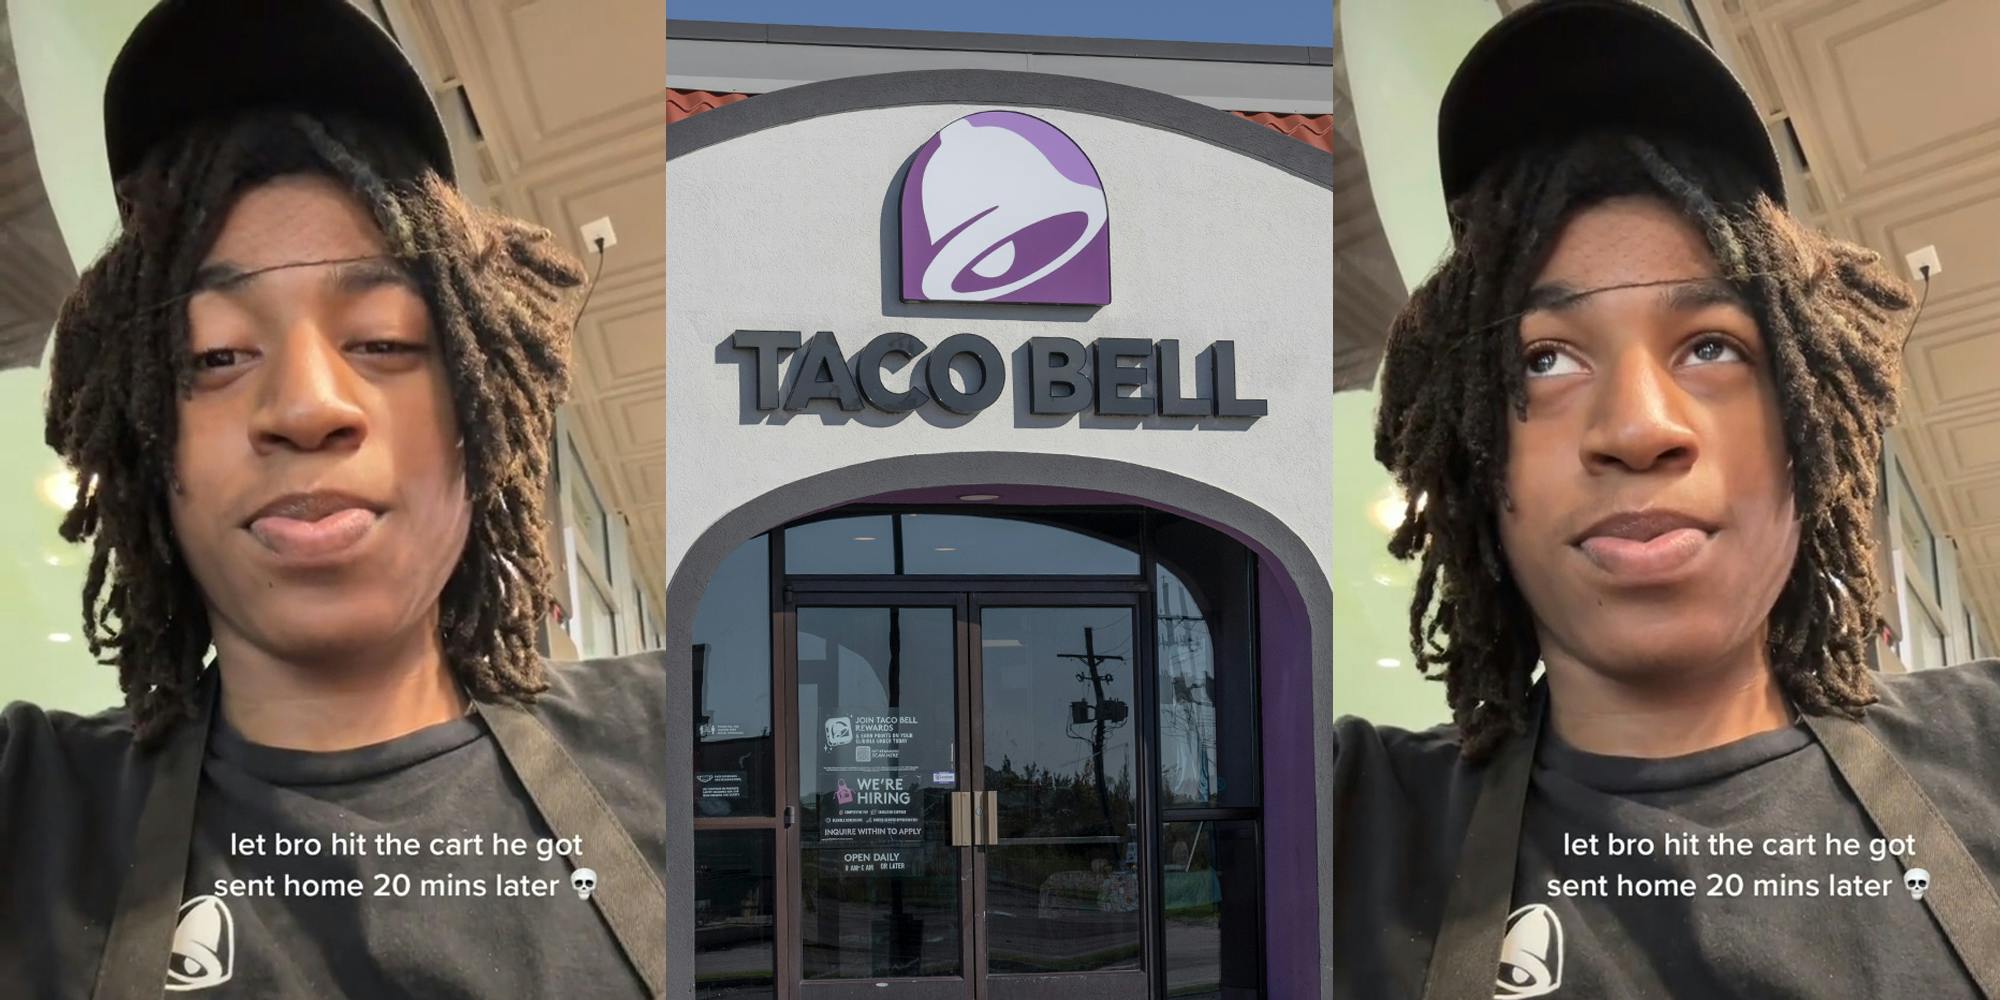 Taco Bell worker with caption "let bro hit the cart he got sent home 20 mins later" (l) Taco Bell building with sign (c) Taco Bell worker with caption "let bro hit the cart he got sent home 20 mins later" (r)